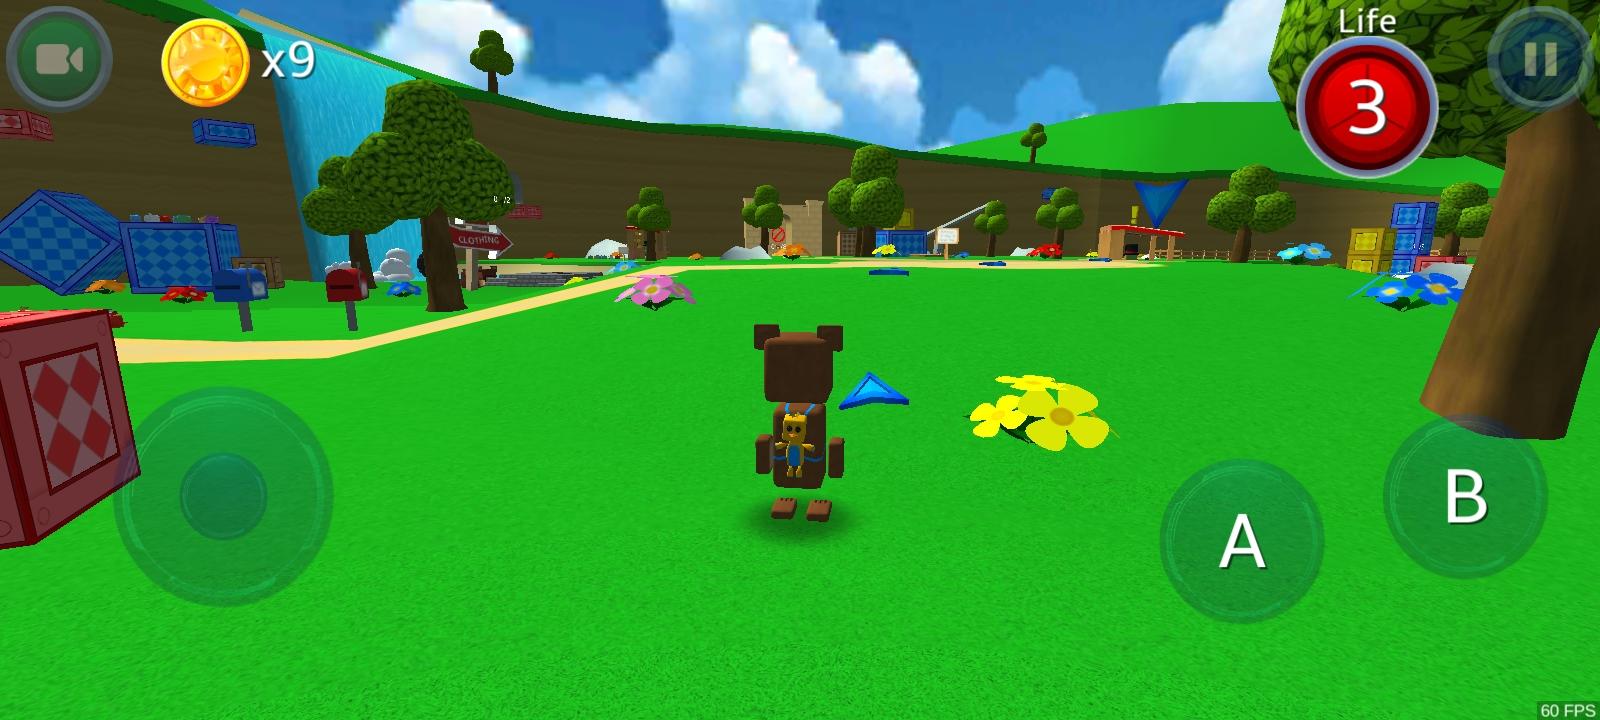 Download and play [3D Platformer] Super Bear Adventure on PC with